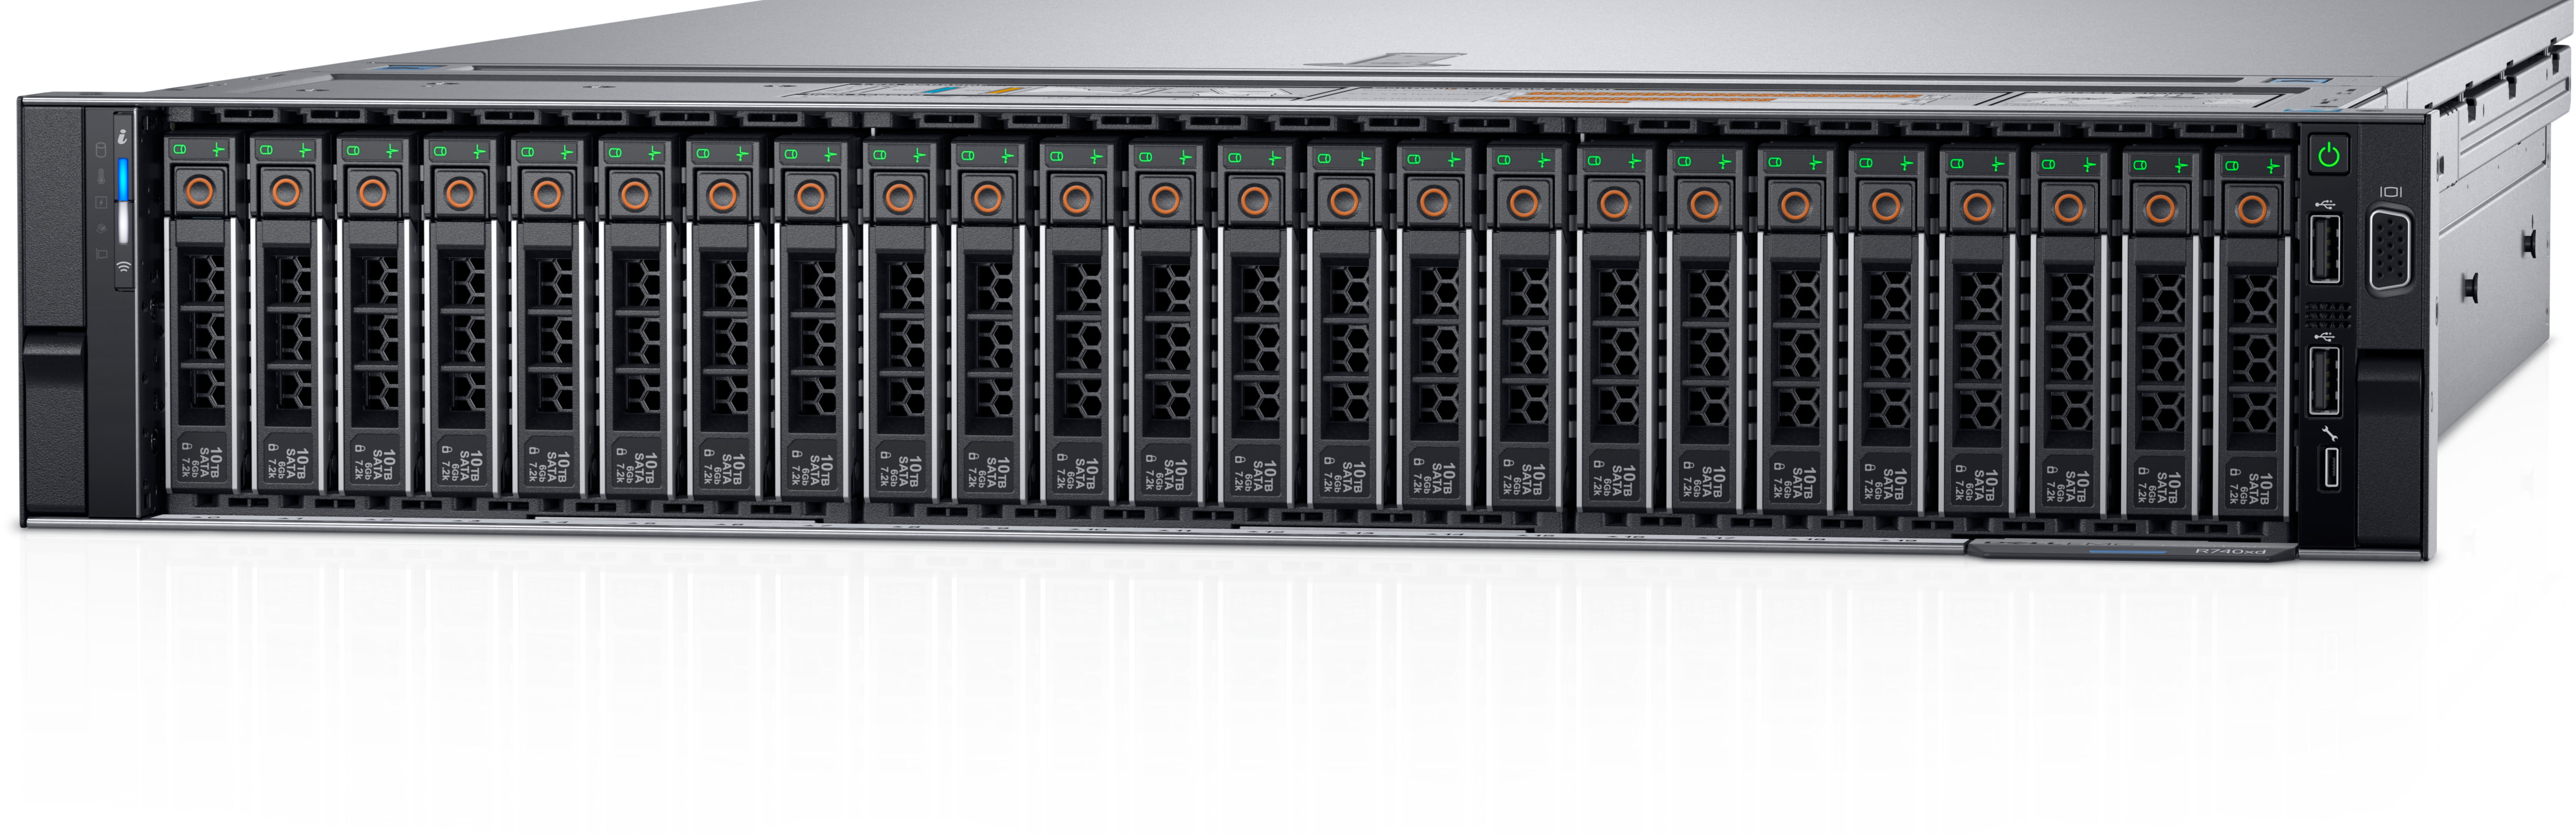 Dell PowerEdge: Servers Guide - History-Computer